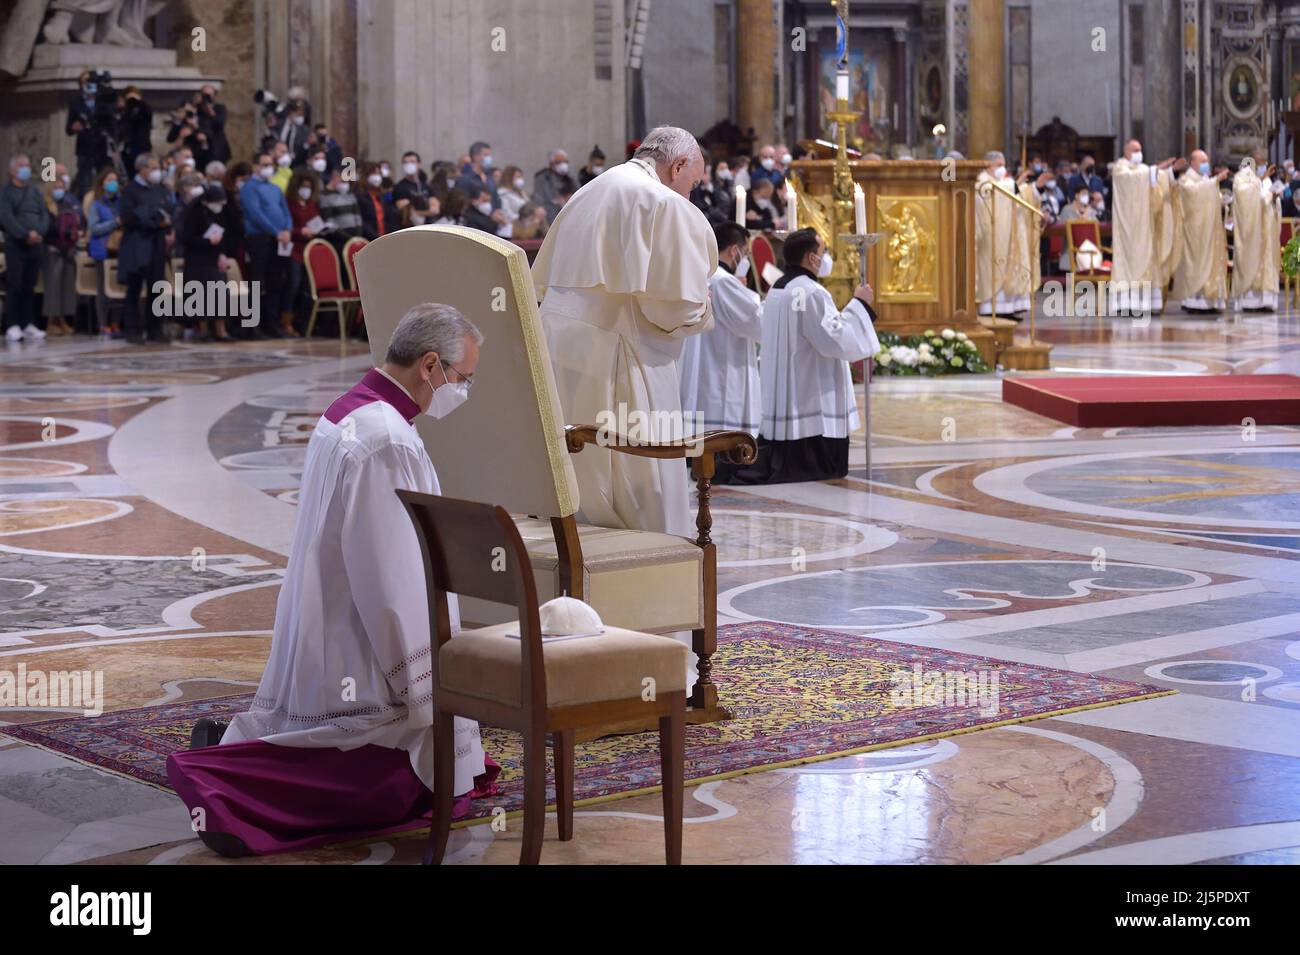 Vatican City State, Vatikanstadt. 24th Apr, 2022. Pope Francis presides over the Divine Mercy mass in St. Peter's Basilica at The Vatican on April 24, 2022. Credit: dpa/Alamy Live News Stock Photo